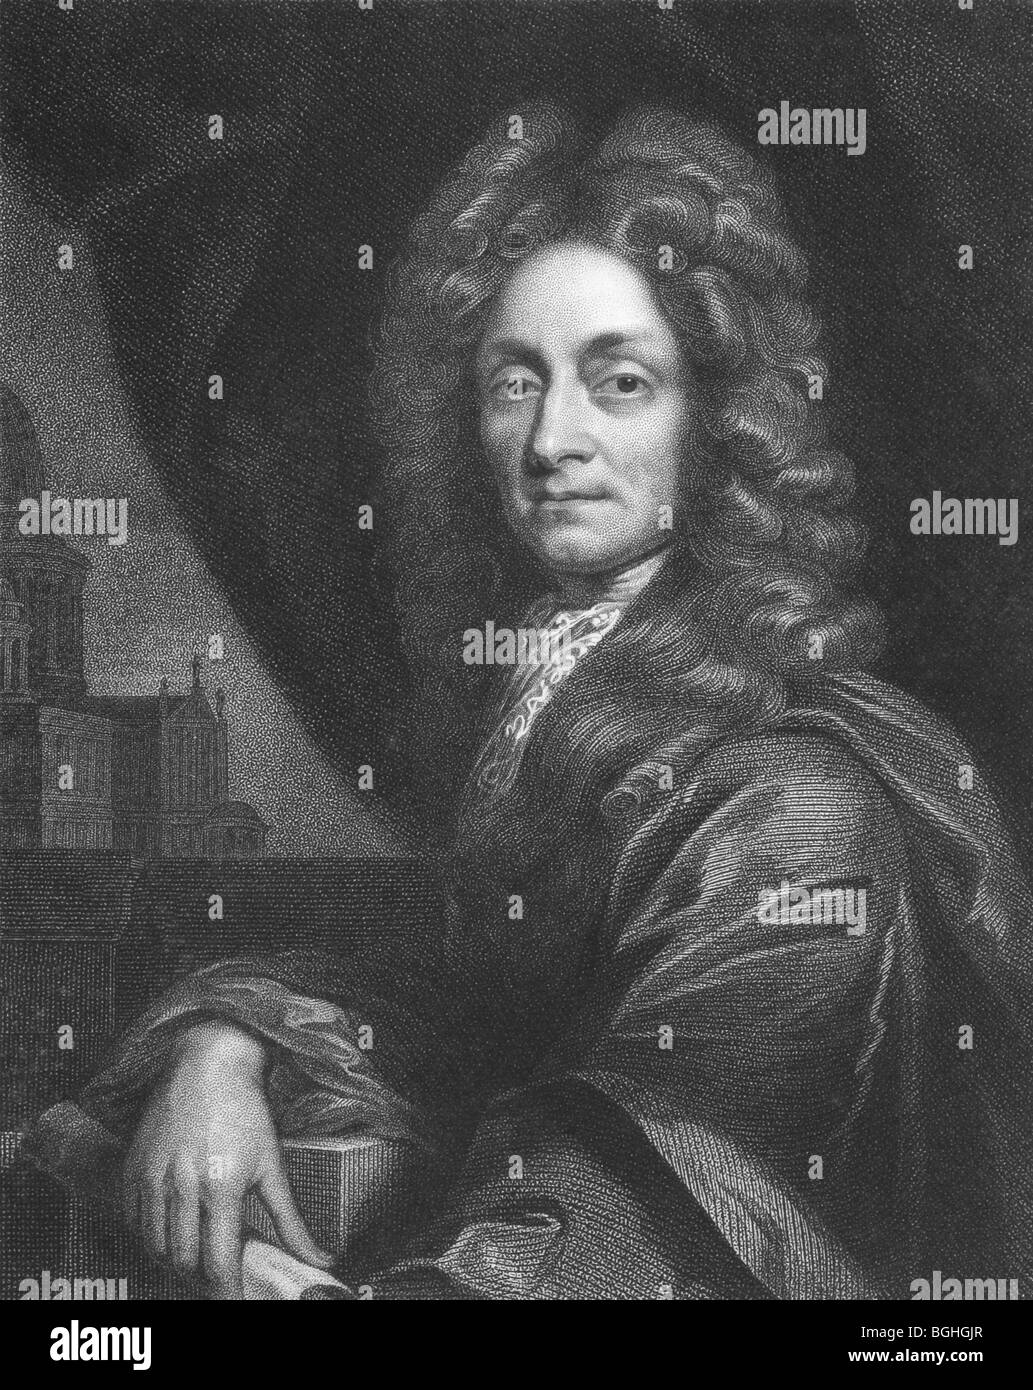 Christopher Wren on engraving from the 1850s. One of the best known English architects. Stock Photo